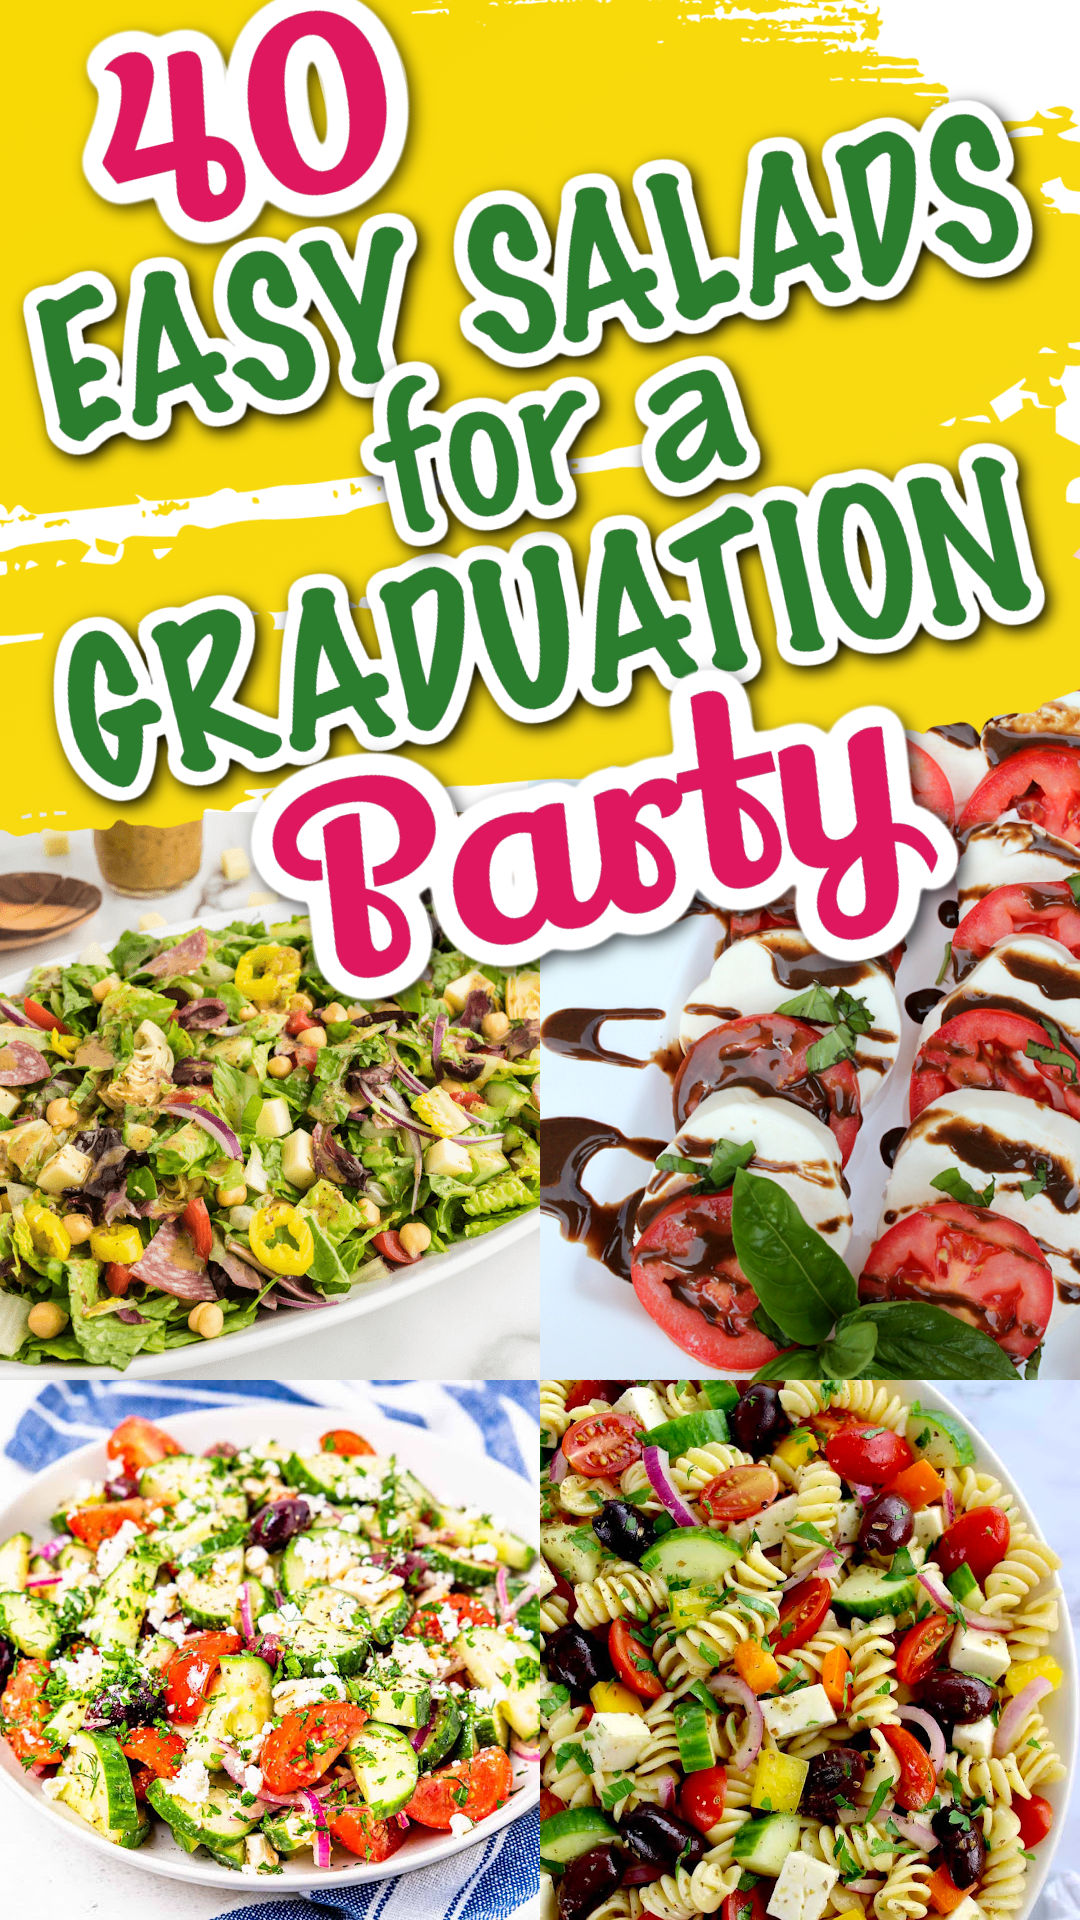 A collage of Easy salads for a graduation party including vegetable and fruit salads.